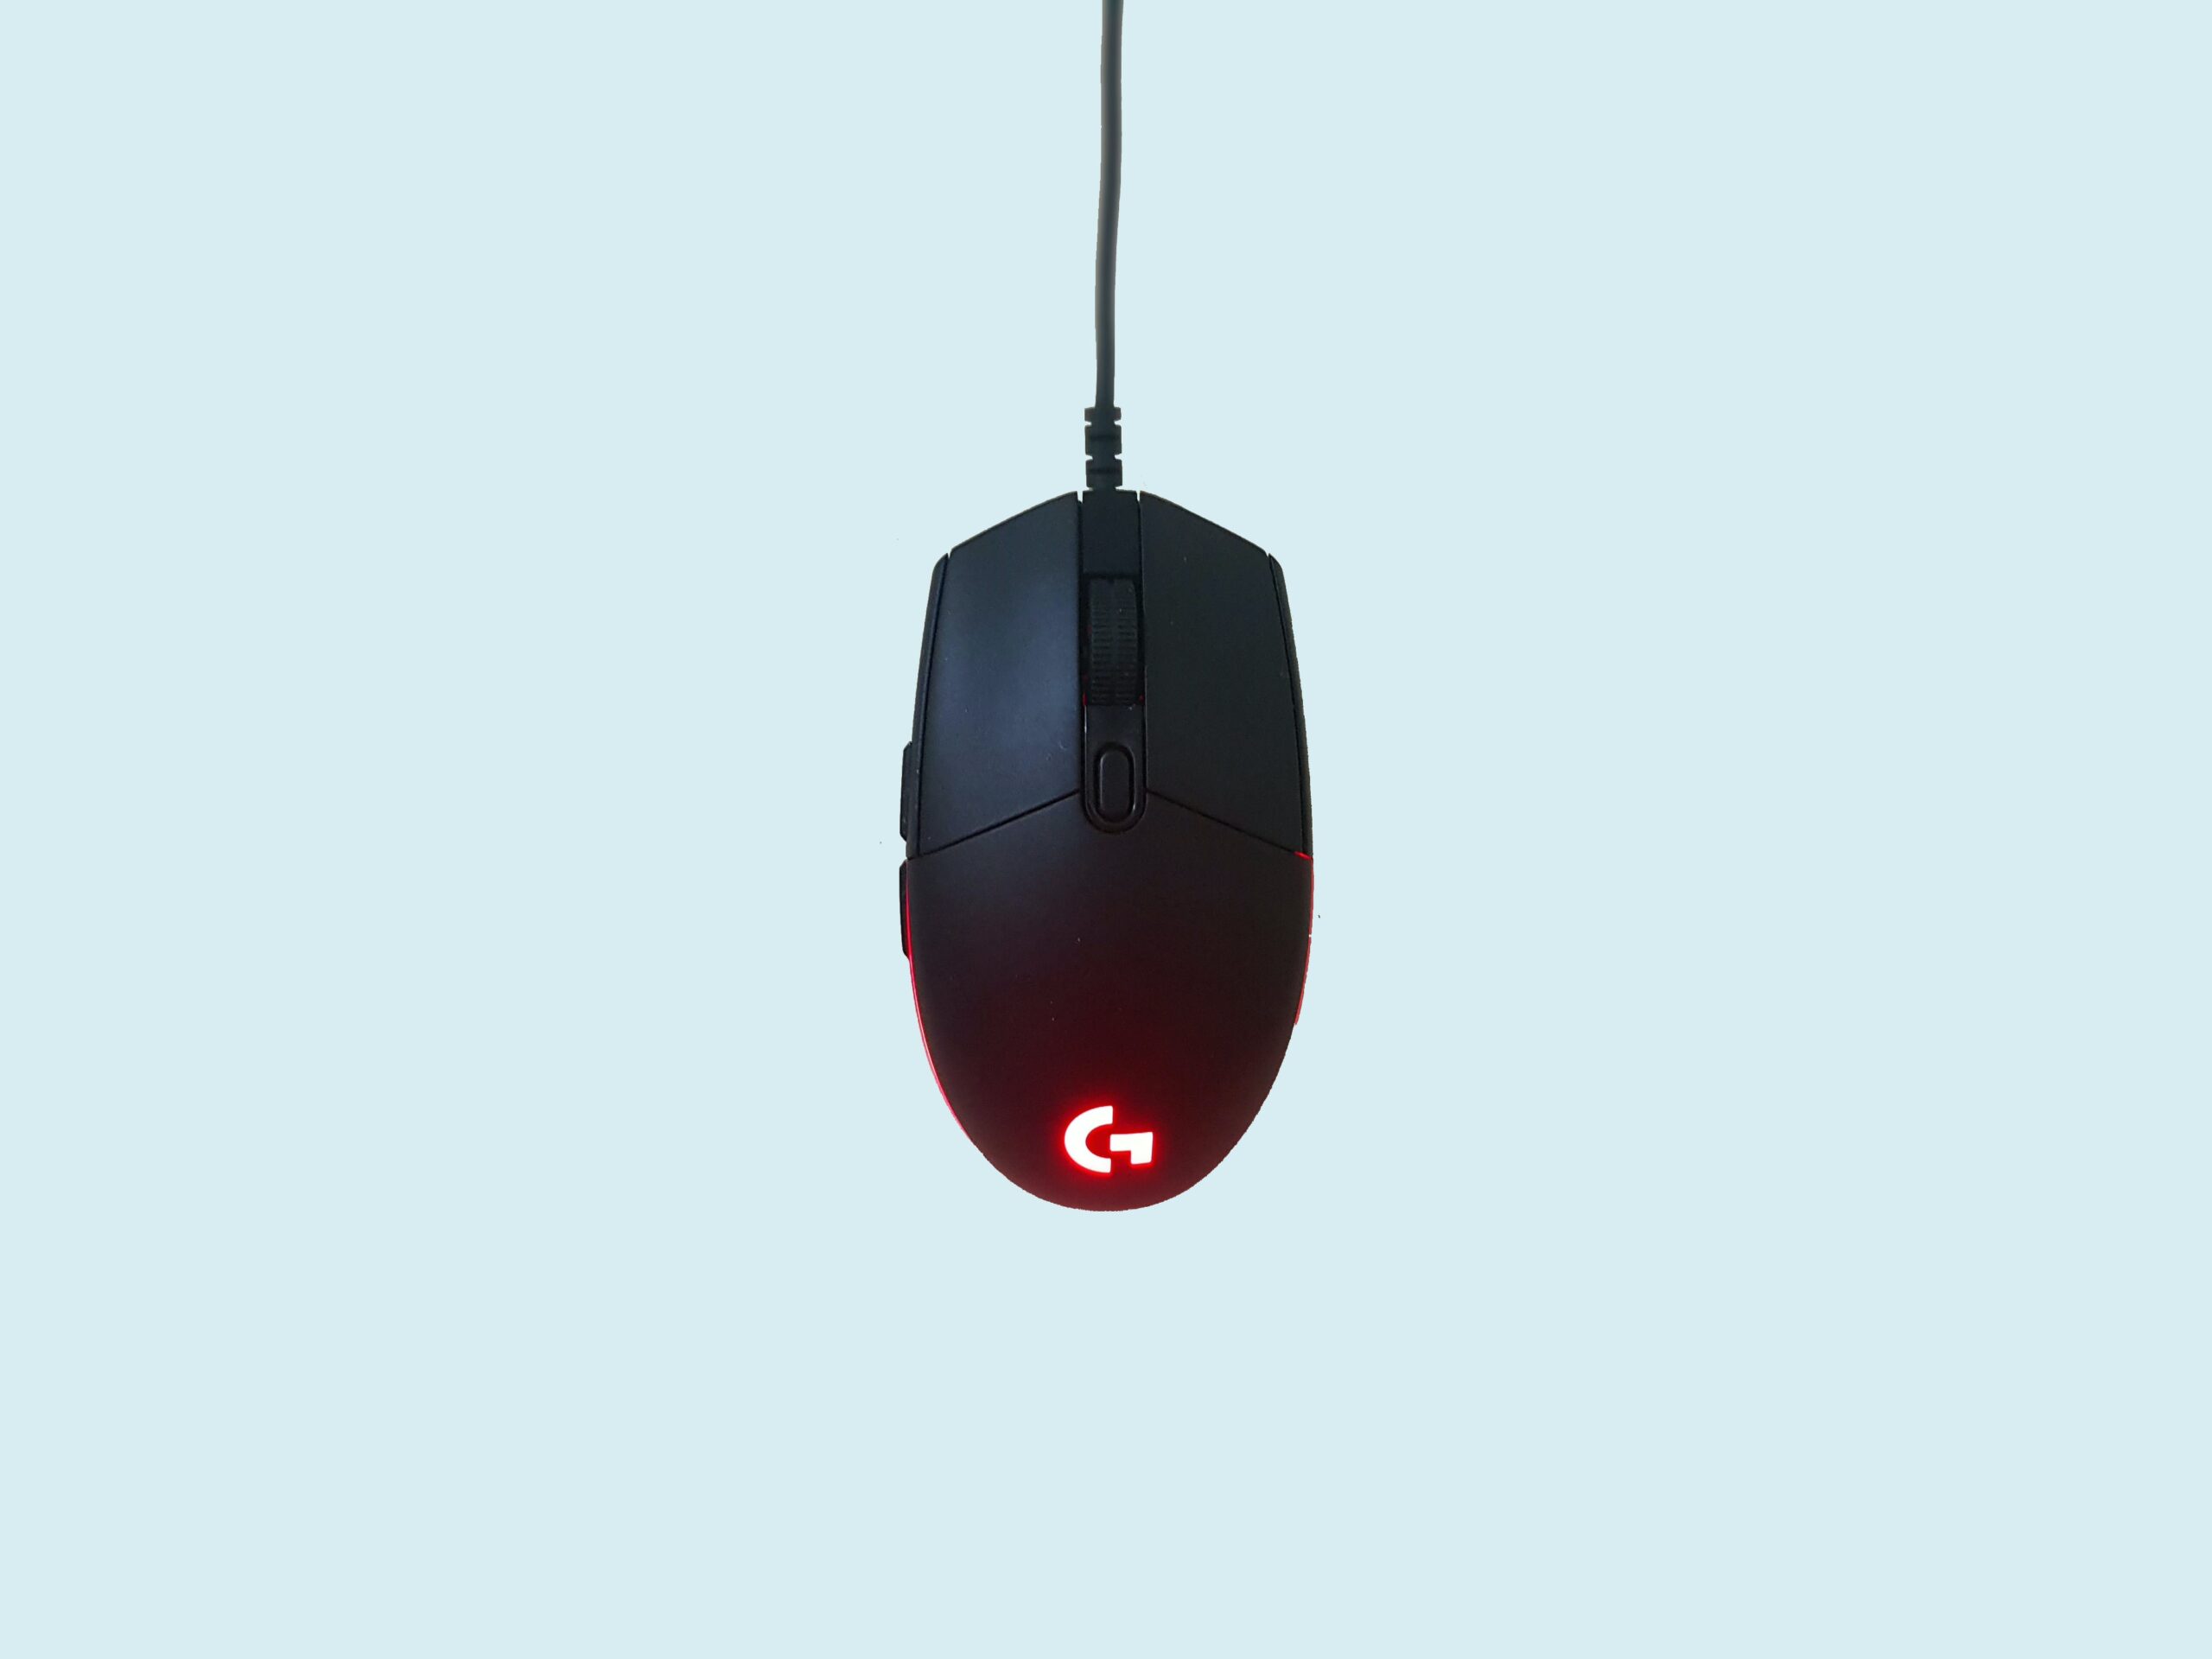 How Long Does A Computer Mouse Last?